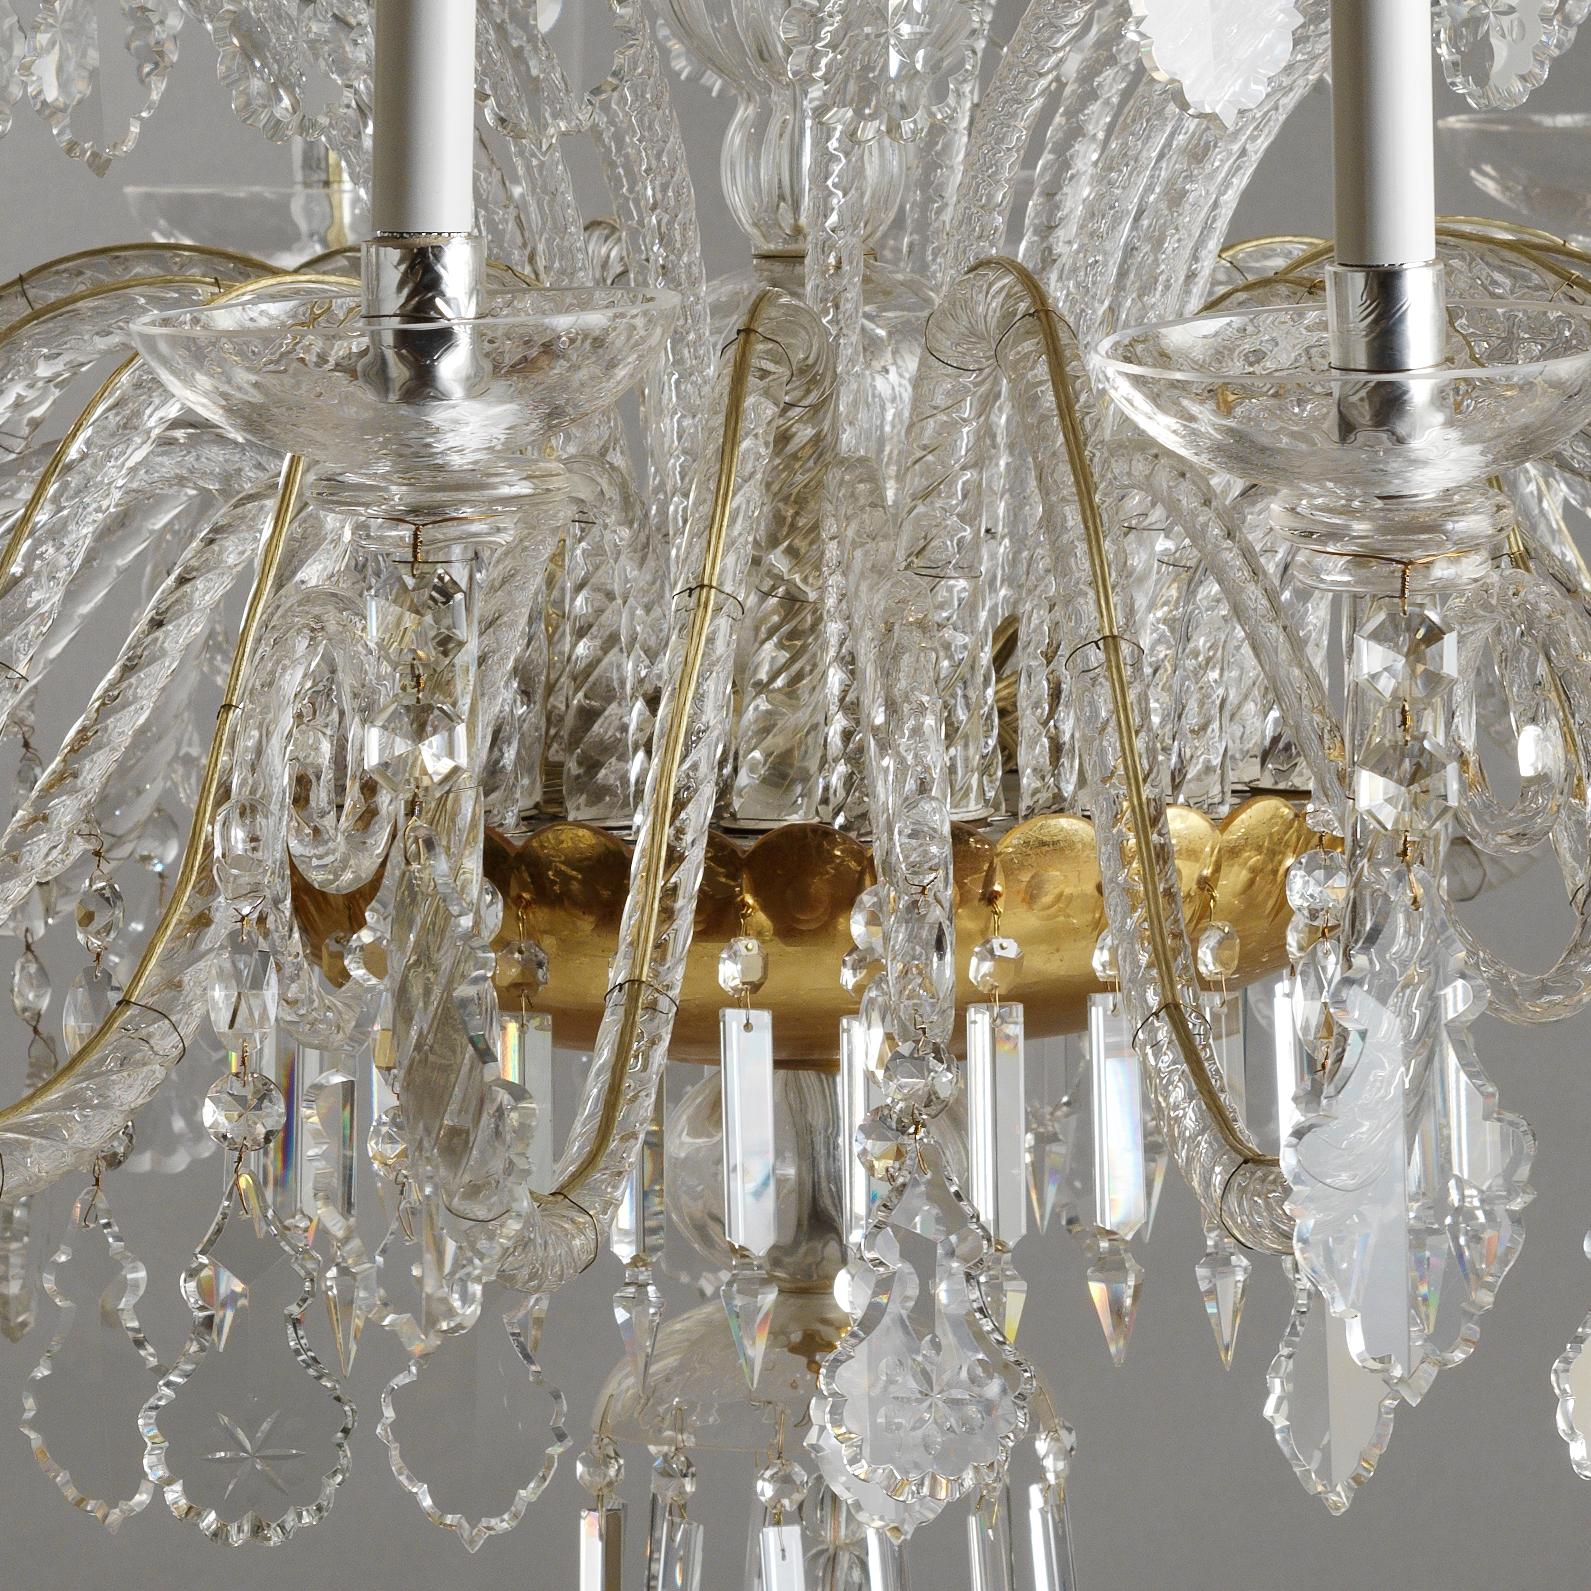 This elegant Italian Rococò Crystal and Blown Glass Chandelier by Gherardo Degli Albizzi is made in transparent color with gilded cups. This chandelier is composed by three branch layers. Top crown hold plenty of pastorals from which many Bohemian